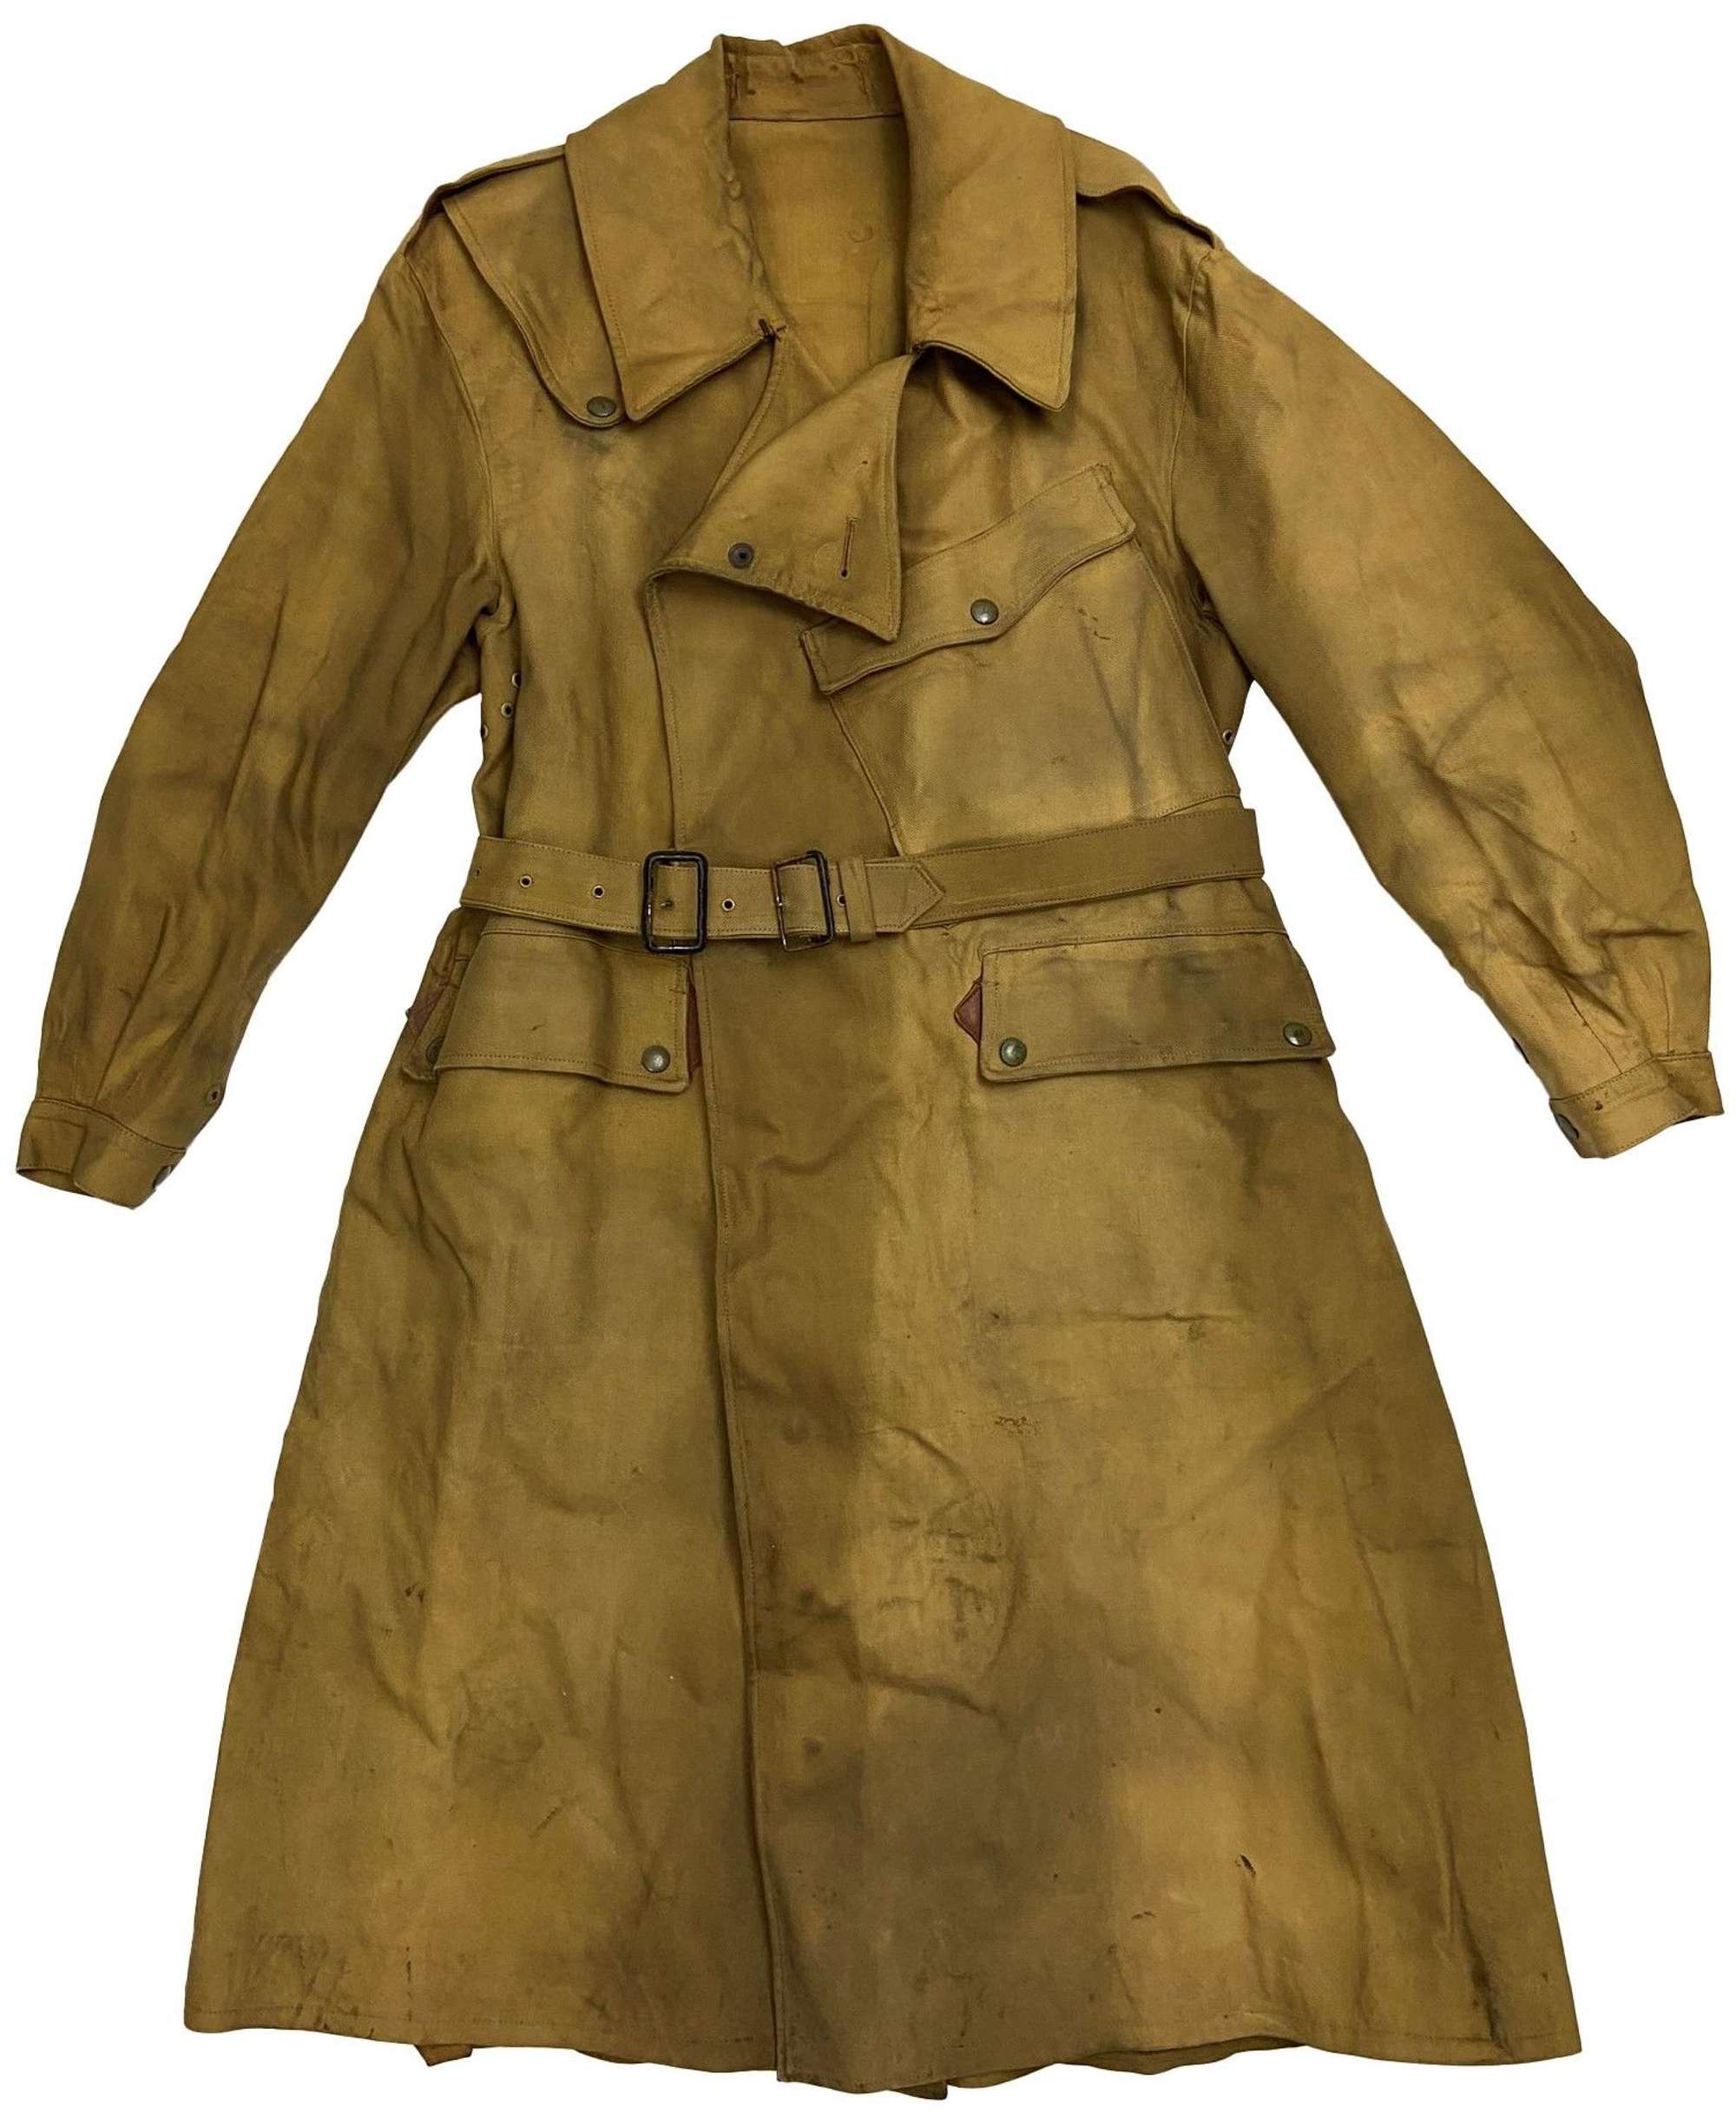 Original 1943 Dated British Army Dispatch Riders Coat by 'Albert Gill'